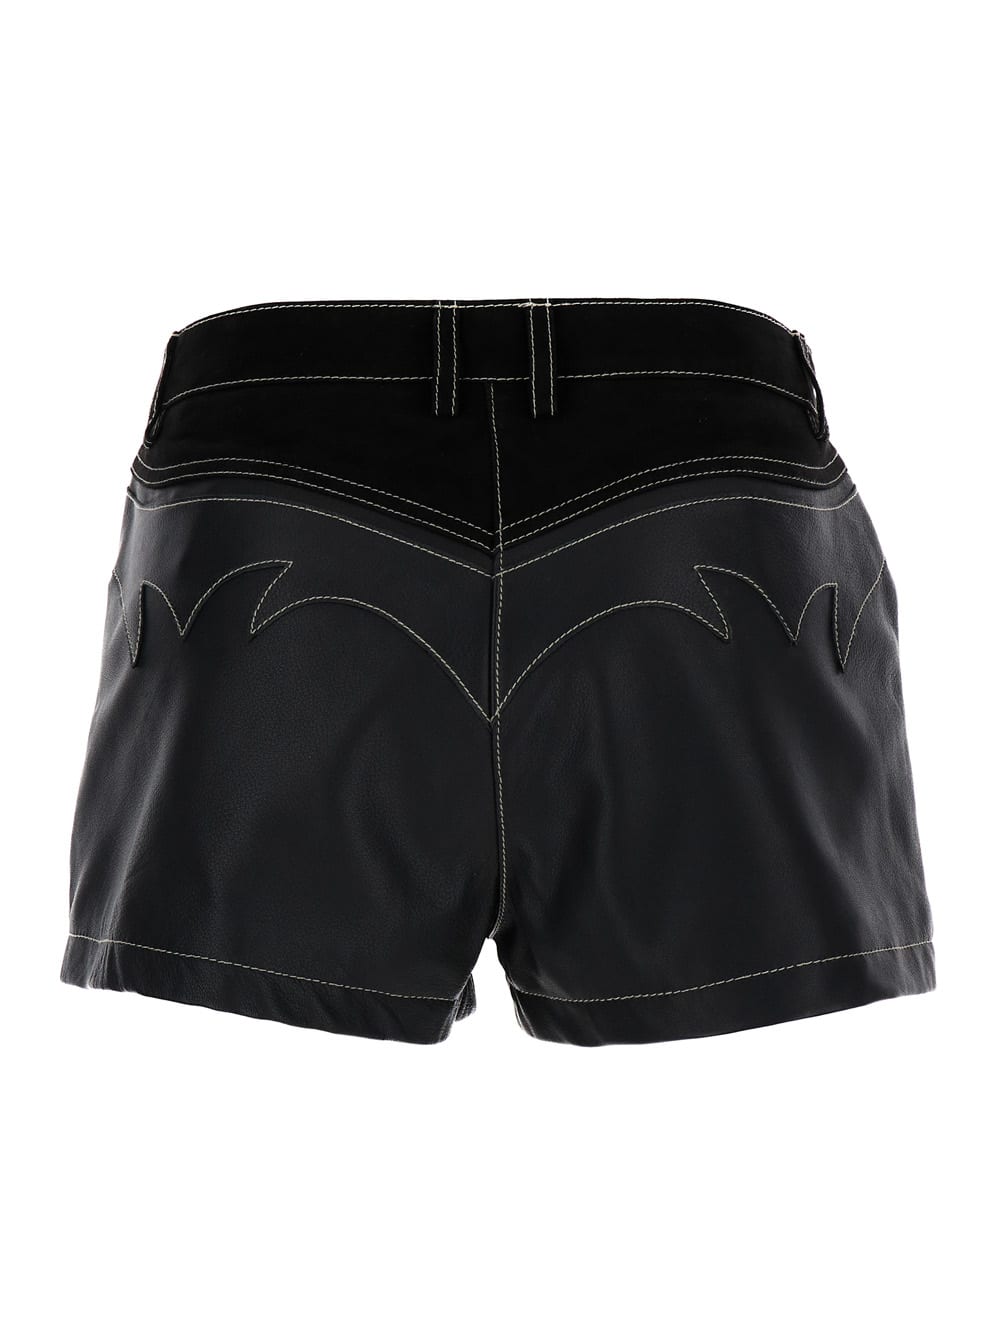 Shop Pinko Black Shorts With Piercing Details In Leather And Suede Woman